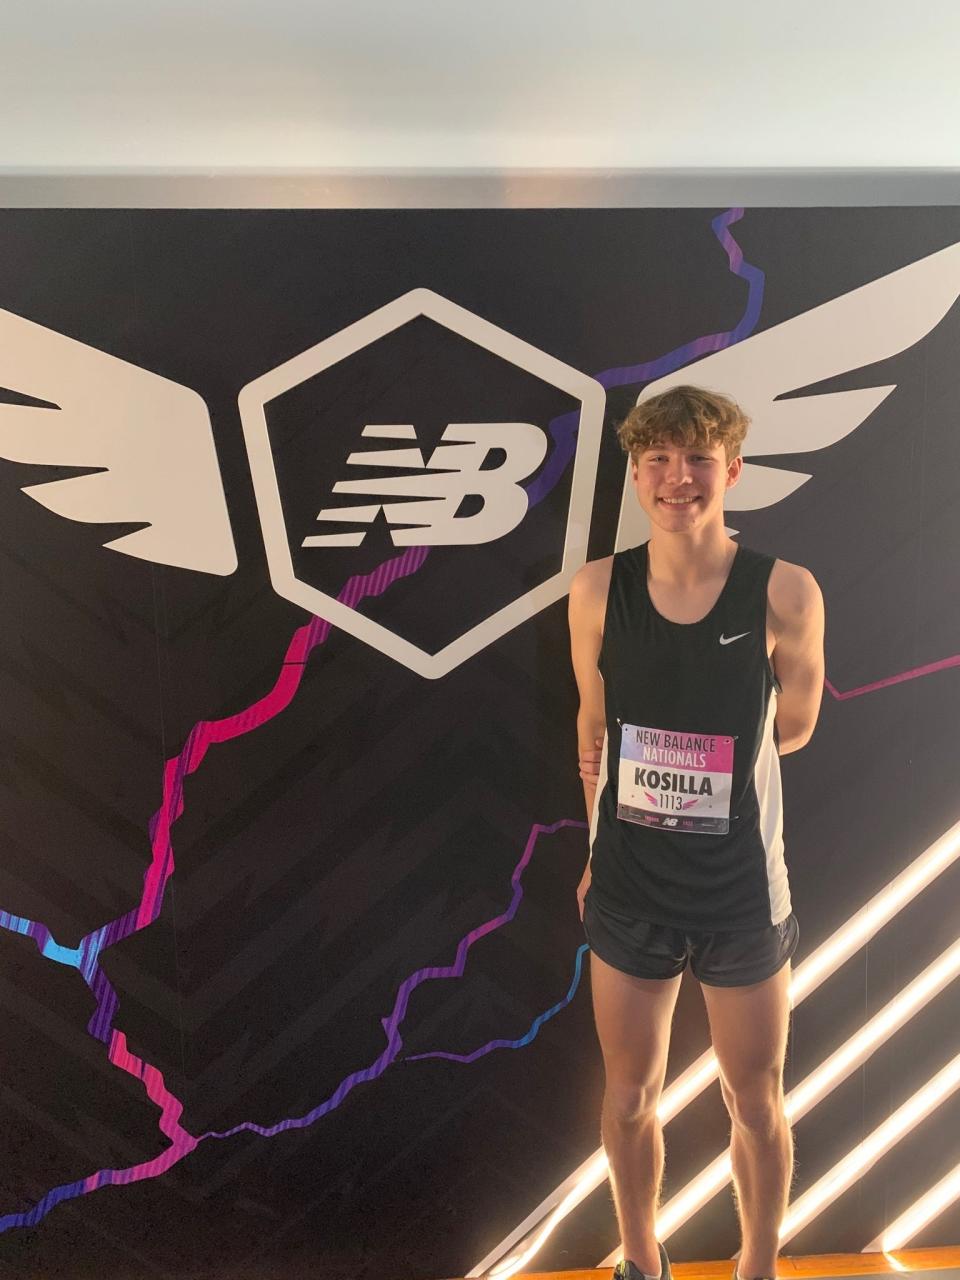 Franklin D. Roosevelt High School senior Jacob Kosilla poses after competing in the 800 meters at the New Balance Nationals indoor tournament in March 2022.